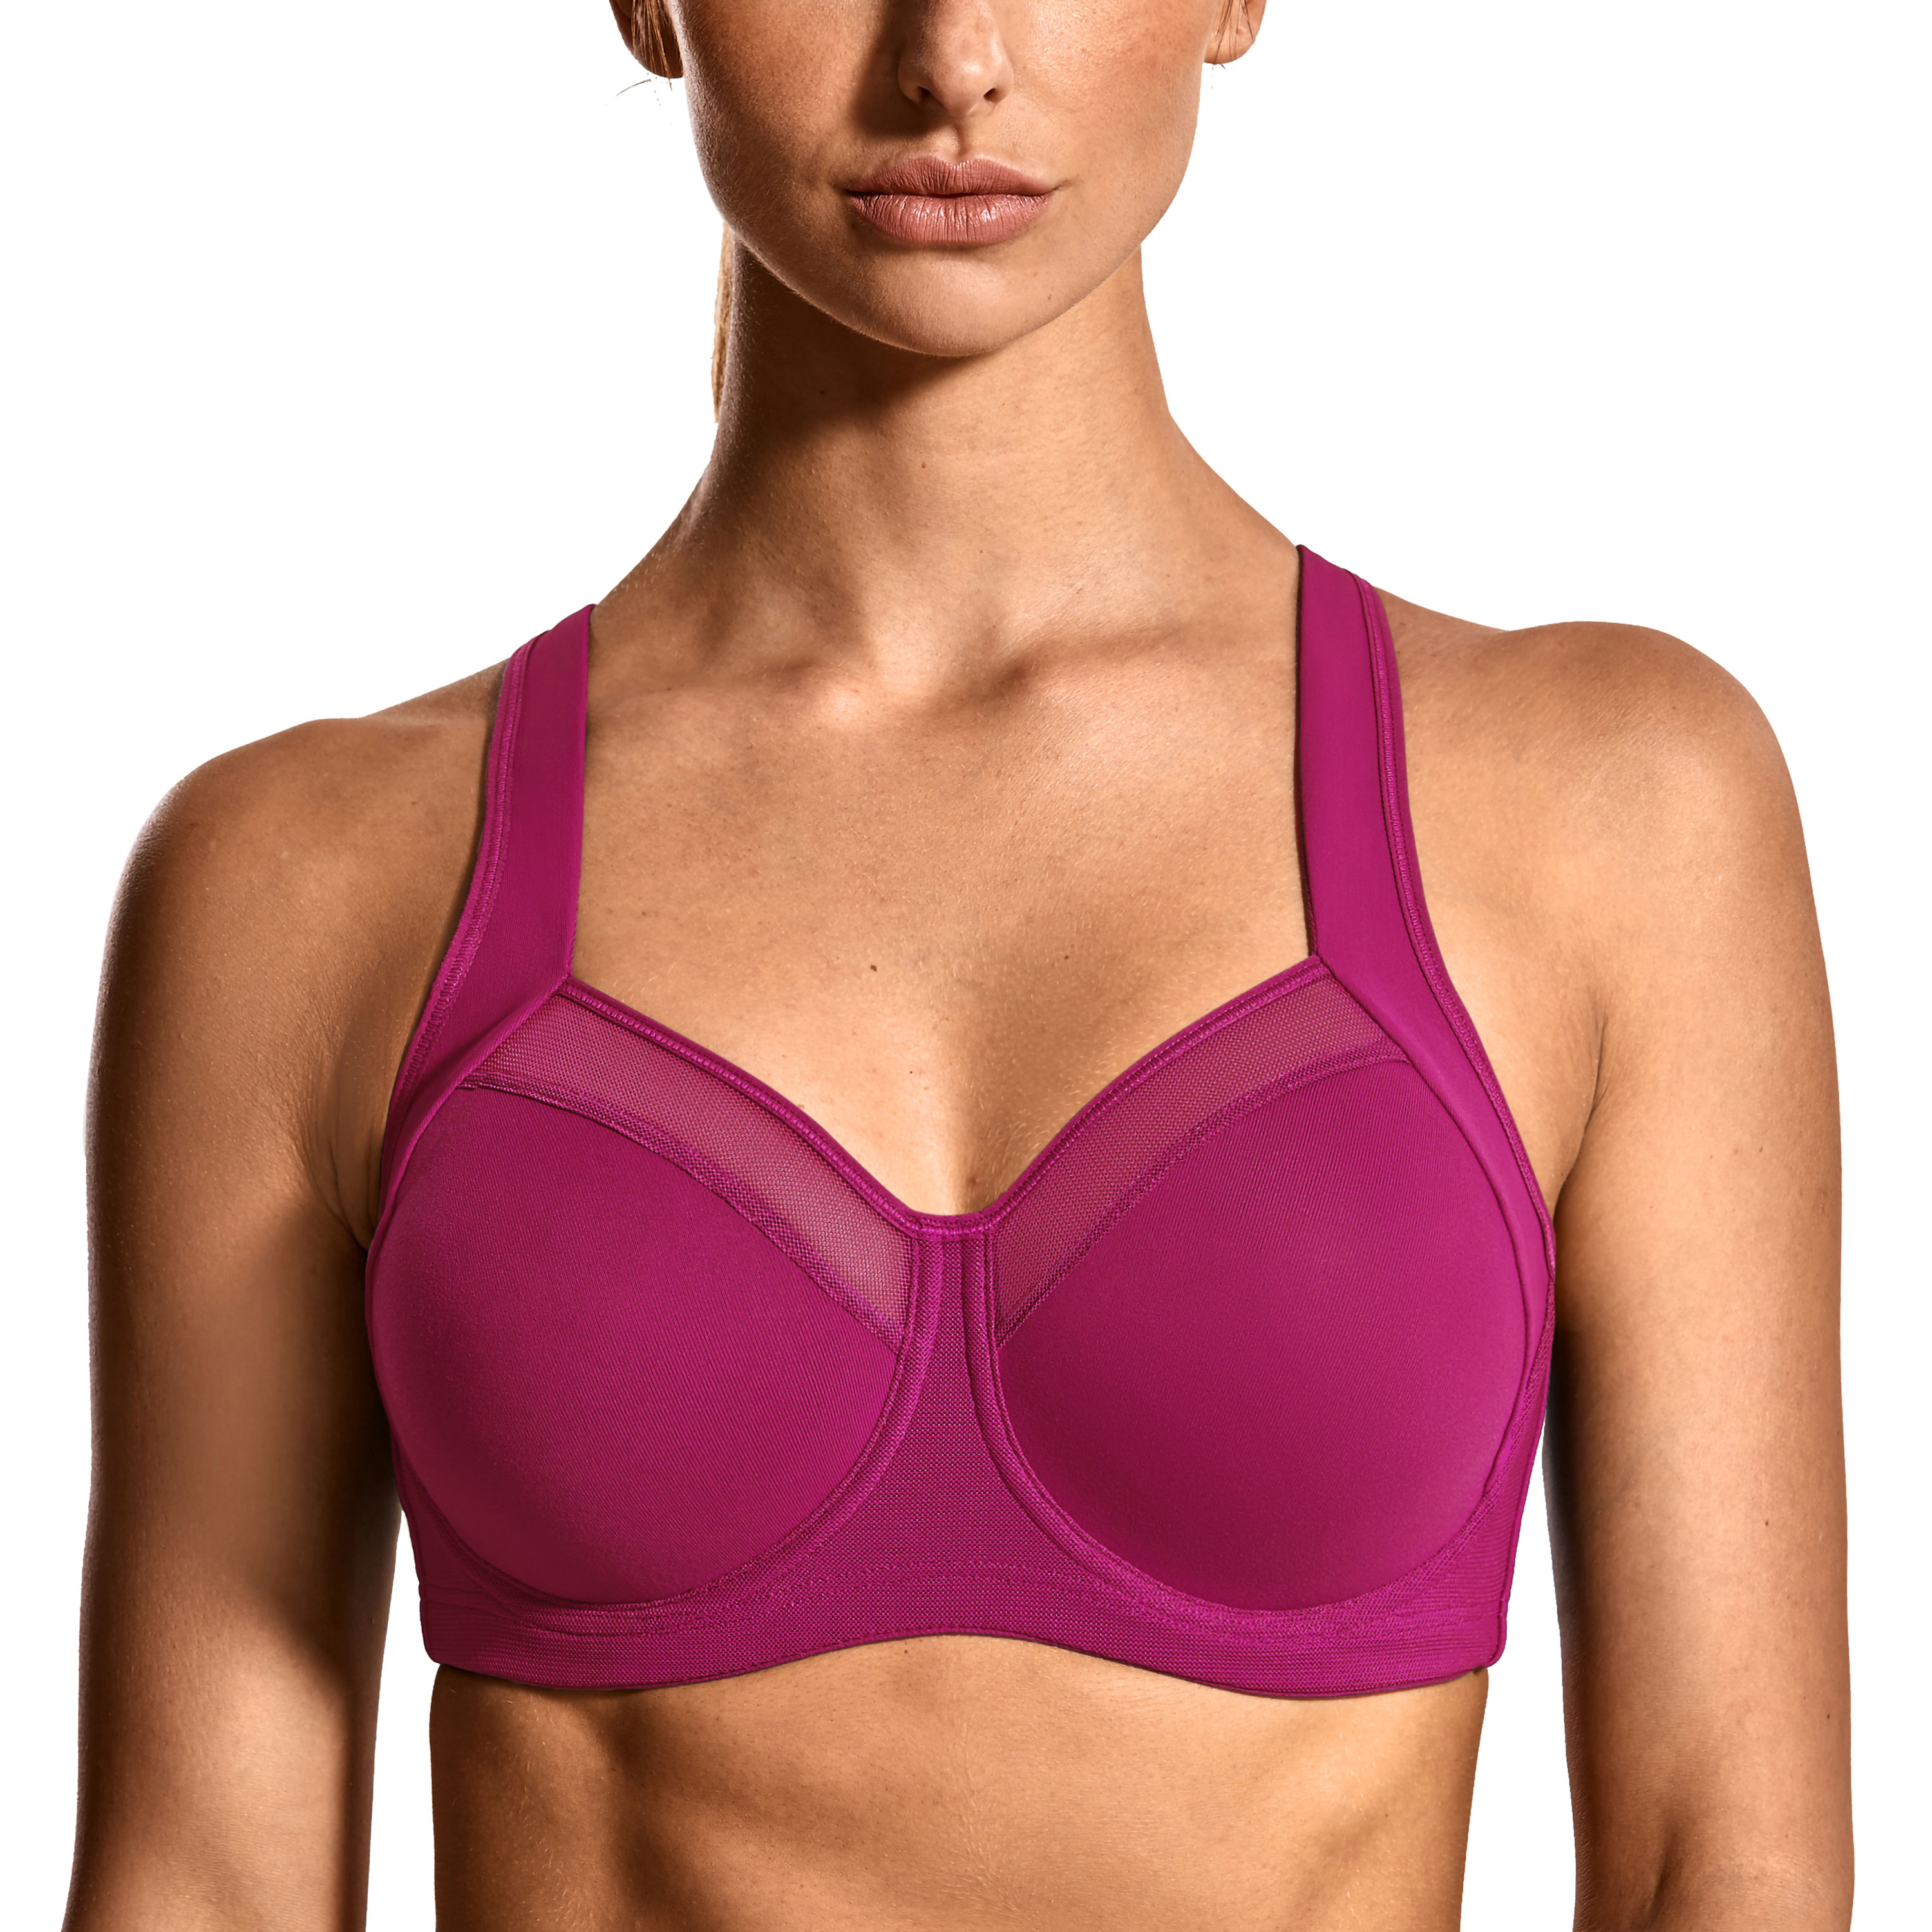 SYROKAN Front Adjustable Sports Bras for Women High Impact